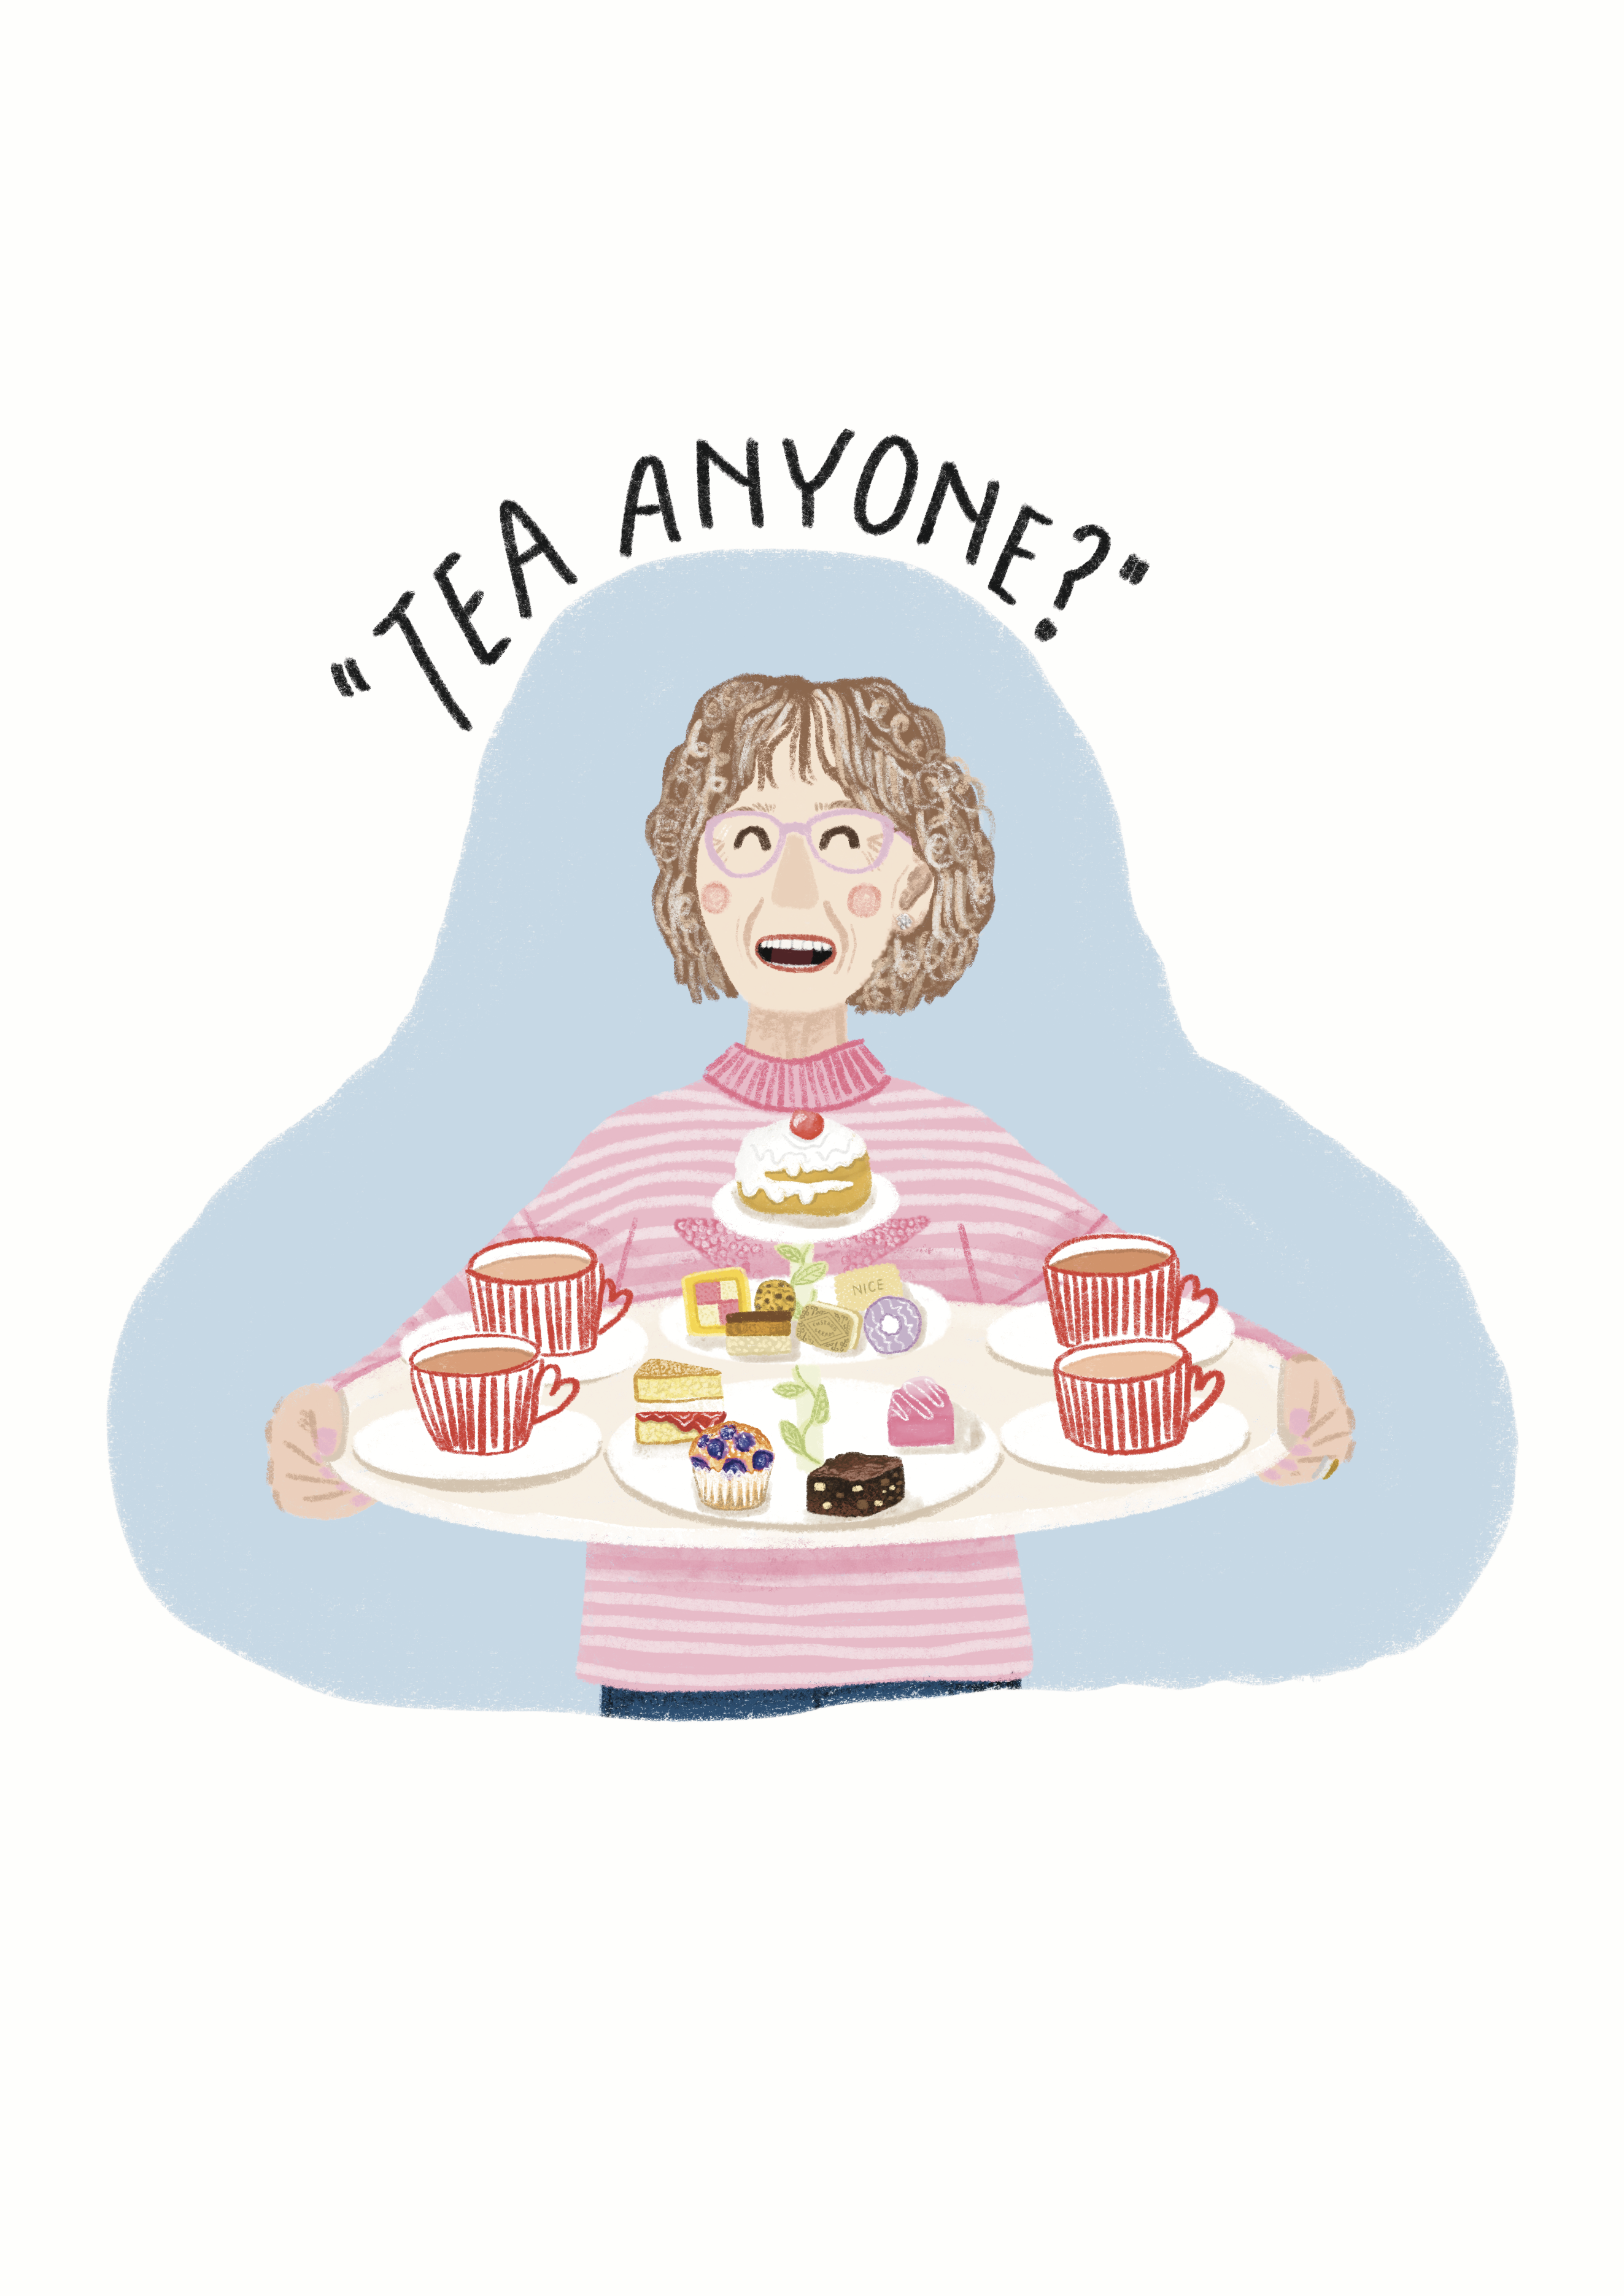 An illustration done by Hope Bullen with a Nan holding a tray of four tea cups and lots of different types of cakes. She is smiling and "tea anyone?" is written above her.